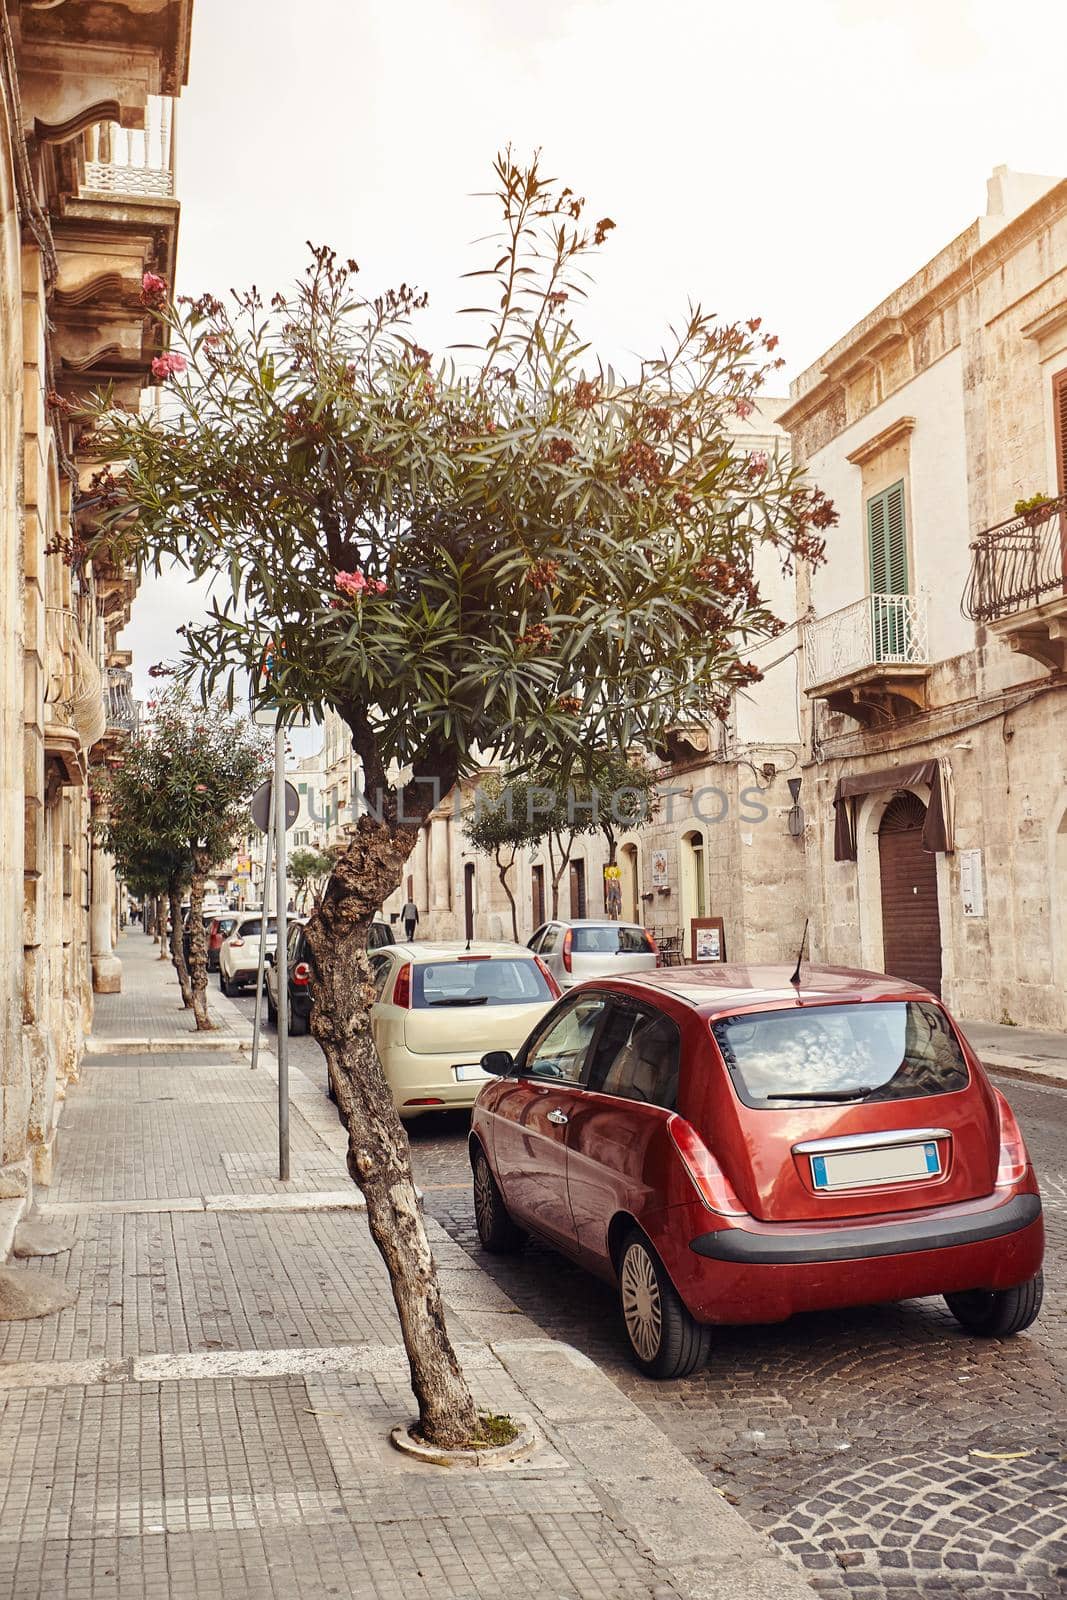 Magnificent architecture of a winding streets decorated with plants in flowerpots. Parked car is standing nearby. Downtown, white city Ostuni, Bari, Italy. Tourism, travel concept.